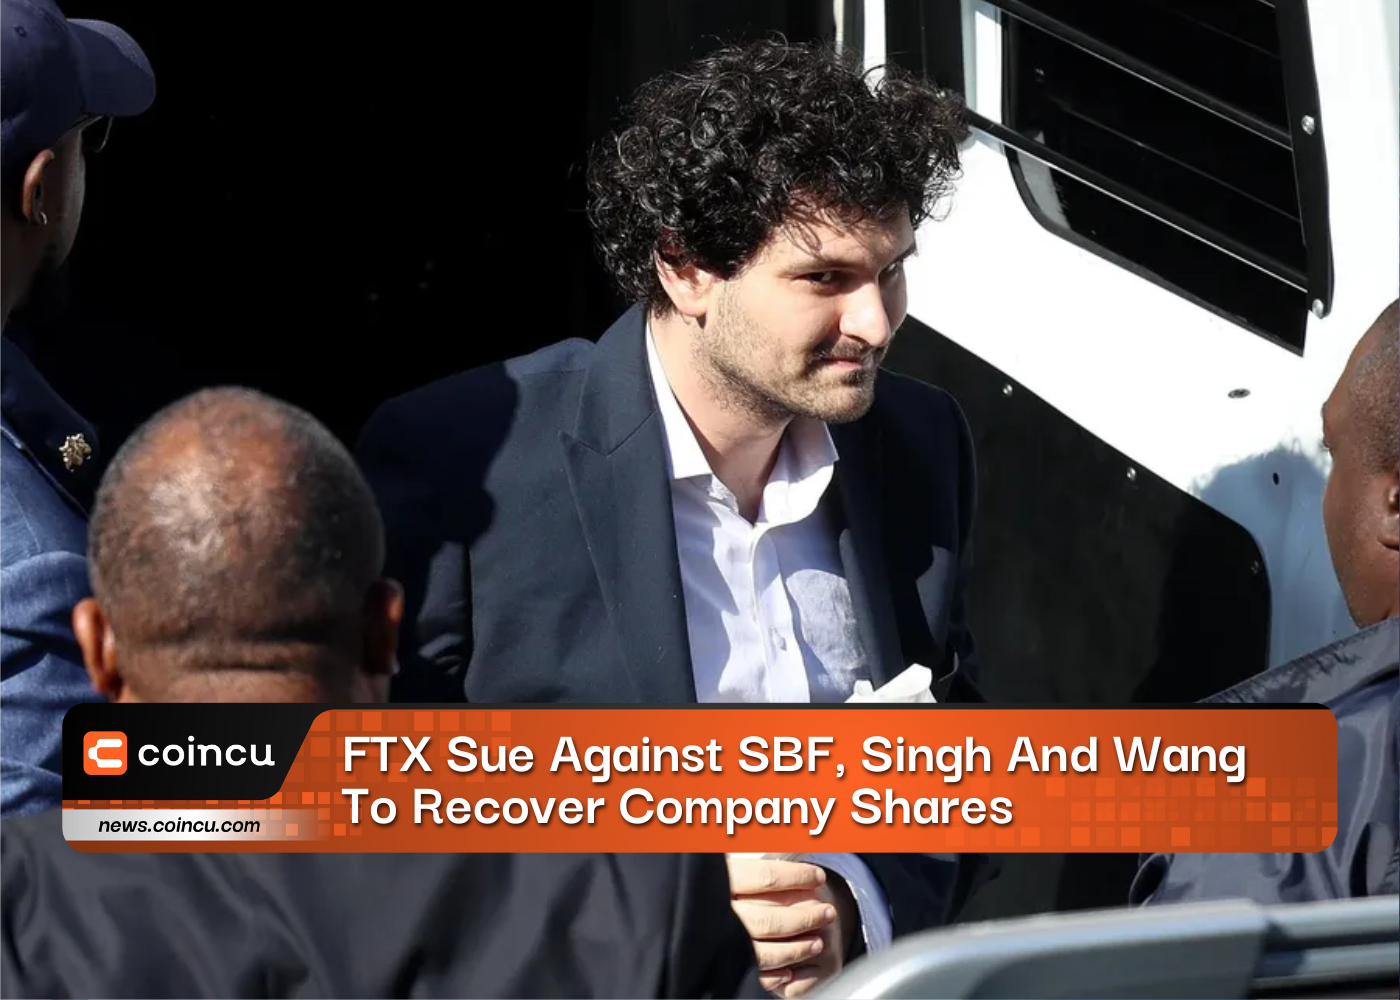 FTX Sue Against SBF, Singh And Wang To Recover Company Shares